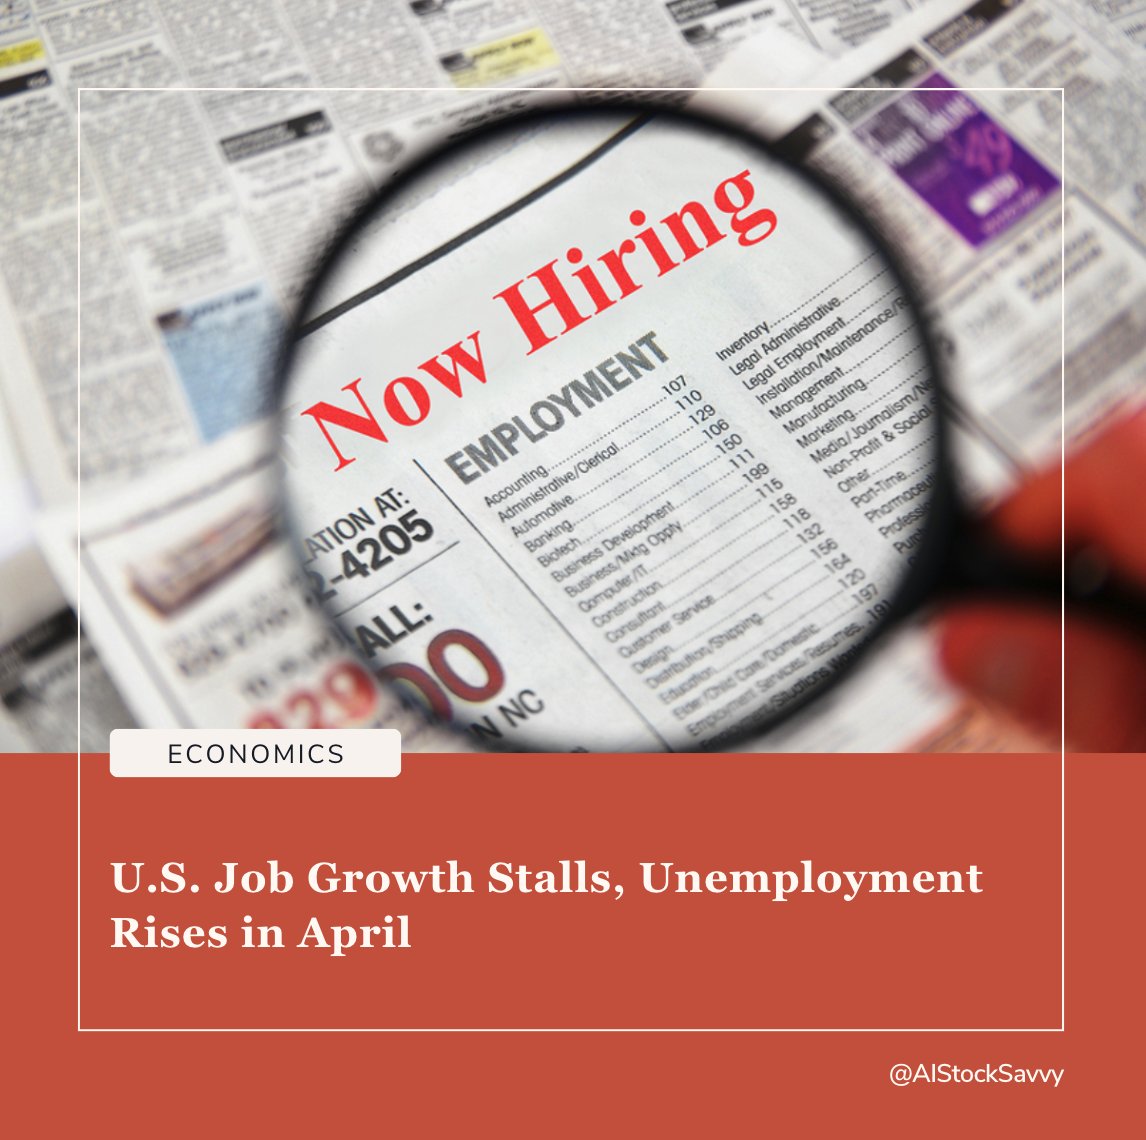 📣 JUST IN: U.S. Job Growth Slows, Unemployment Ticks Up to 3.9% 📉 #Economy #JobsReport

👉 Key Highlights:

📍 U.S. adds 175,000 jobs in April, well below the expected 240,000.

📍 Unemployment rate increases to 3.9%, higher than anticipated 3.8%.

📍 Average hourly earnings